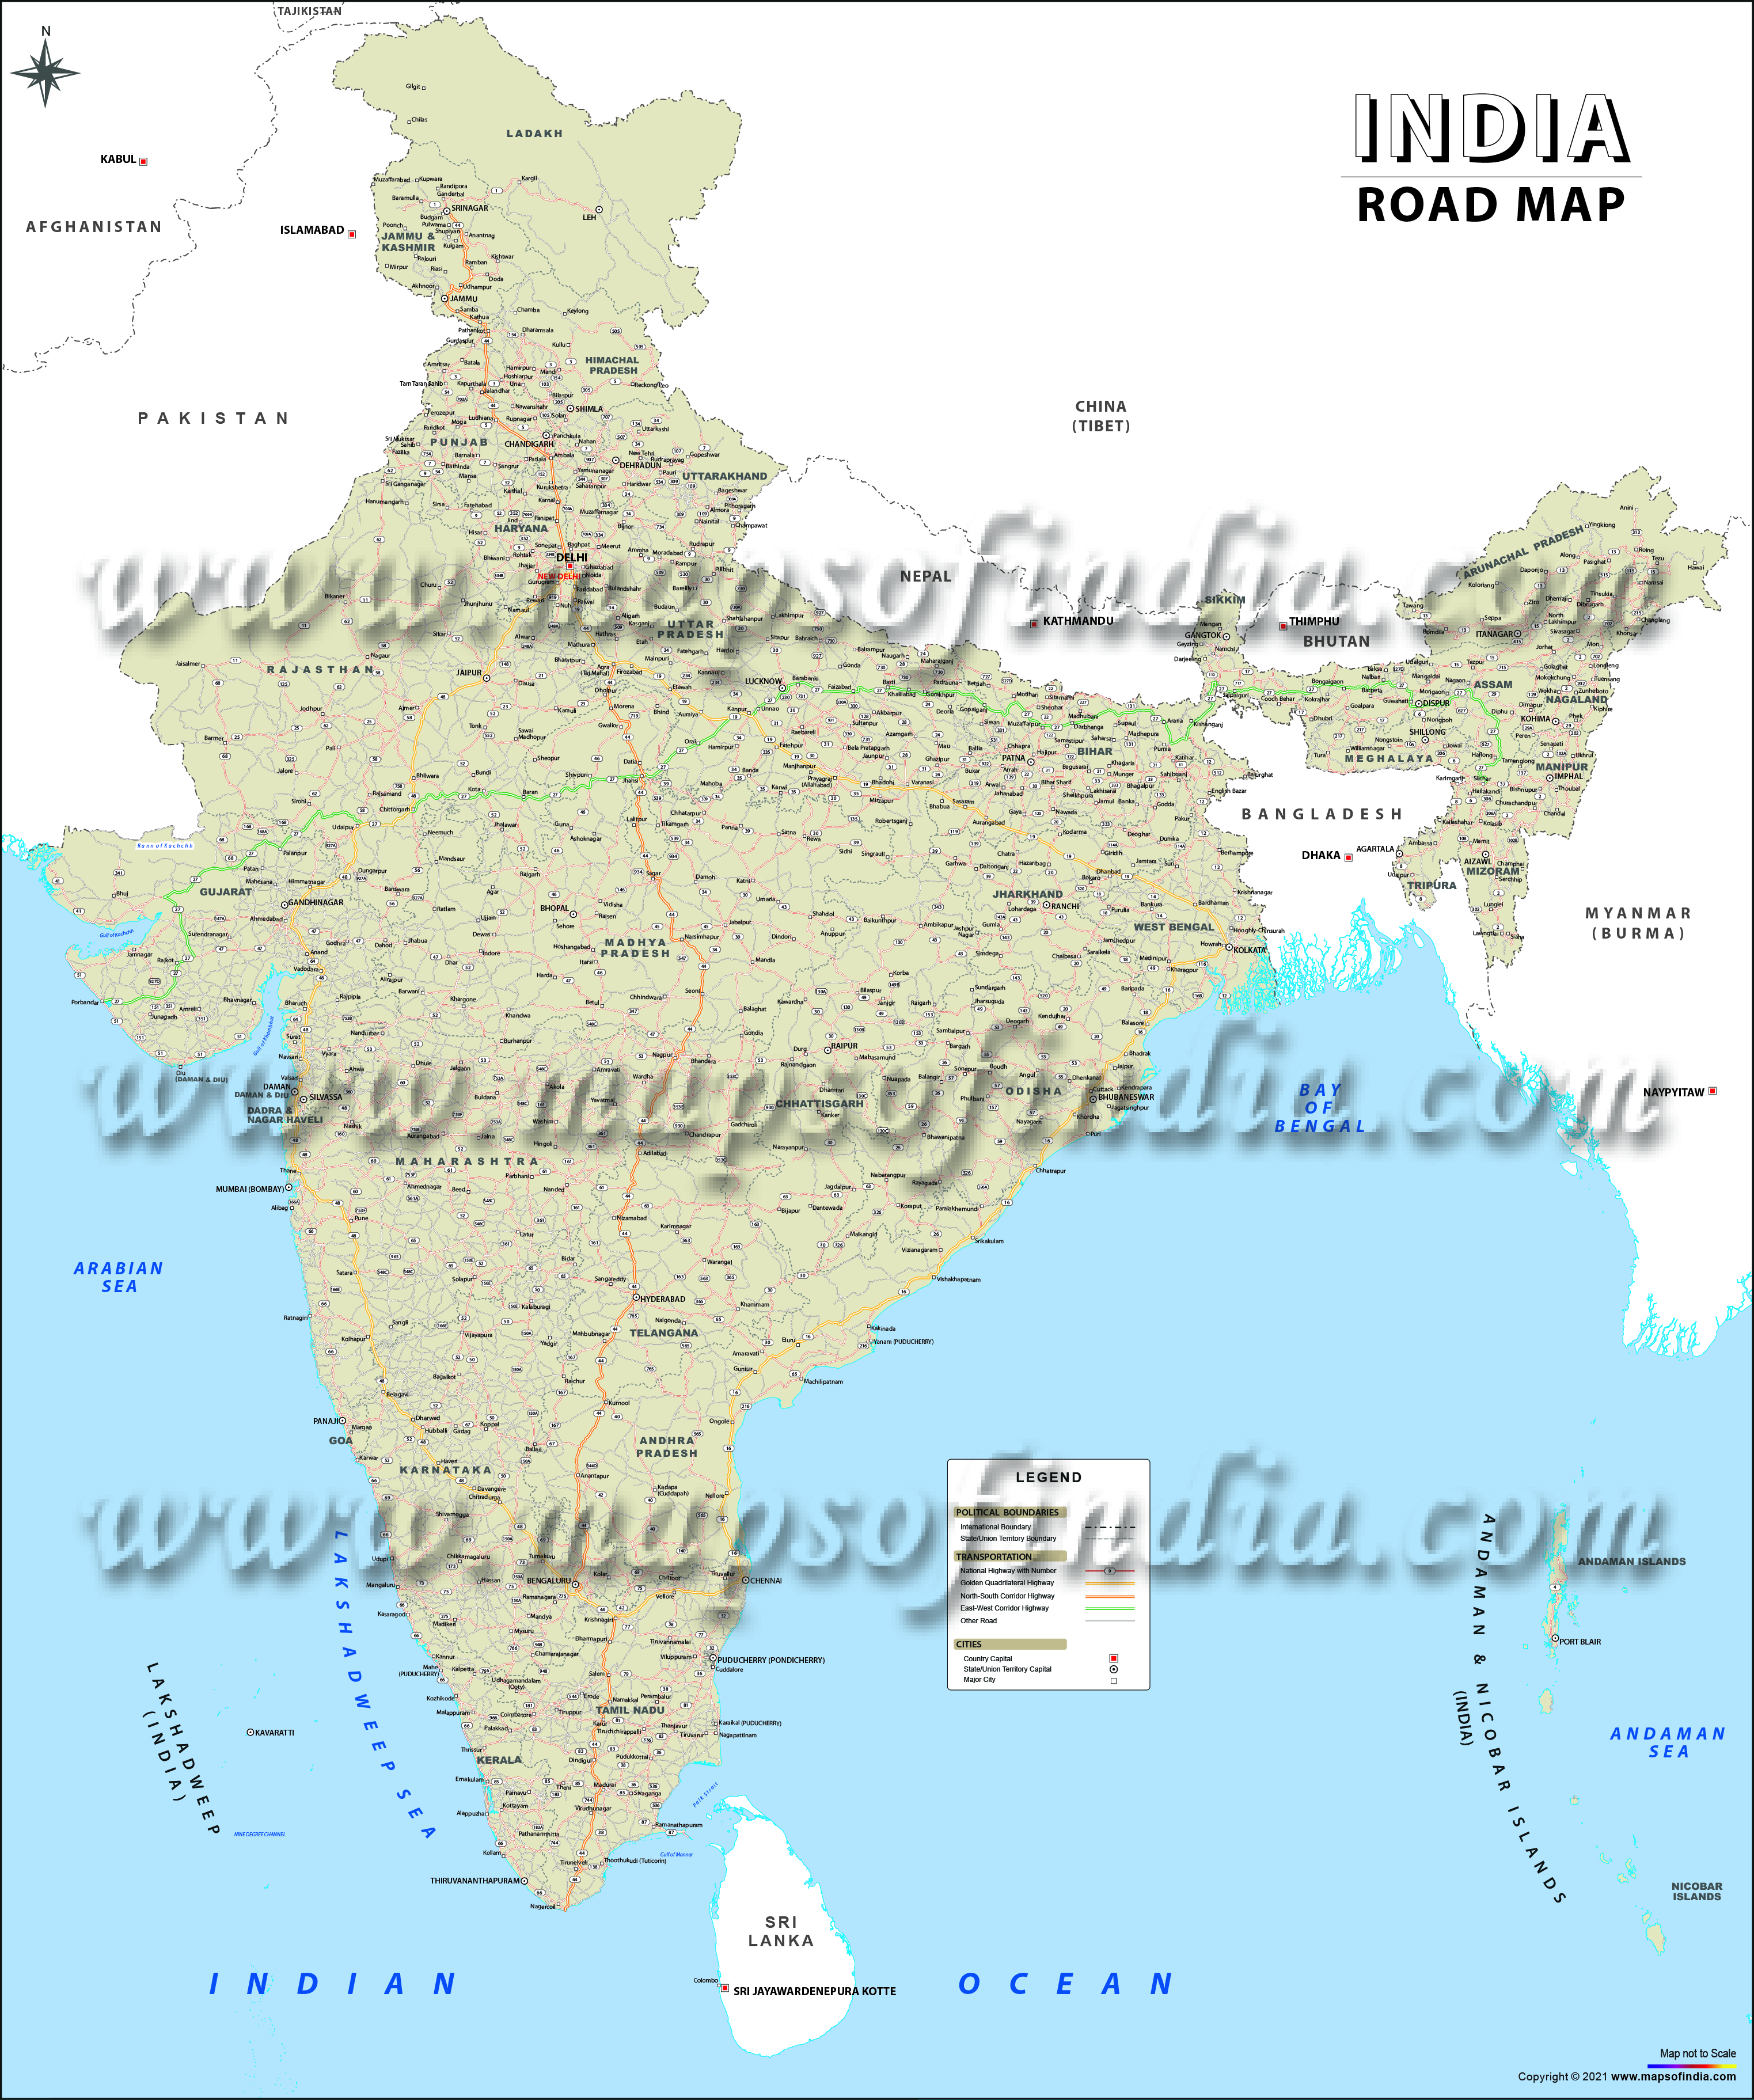 Road Distance Map Of India India Road Maps, Indian Road Network, List of Expressways India